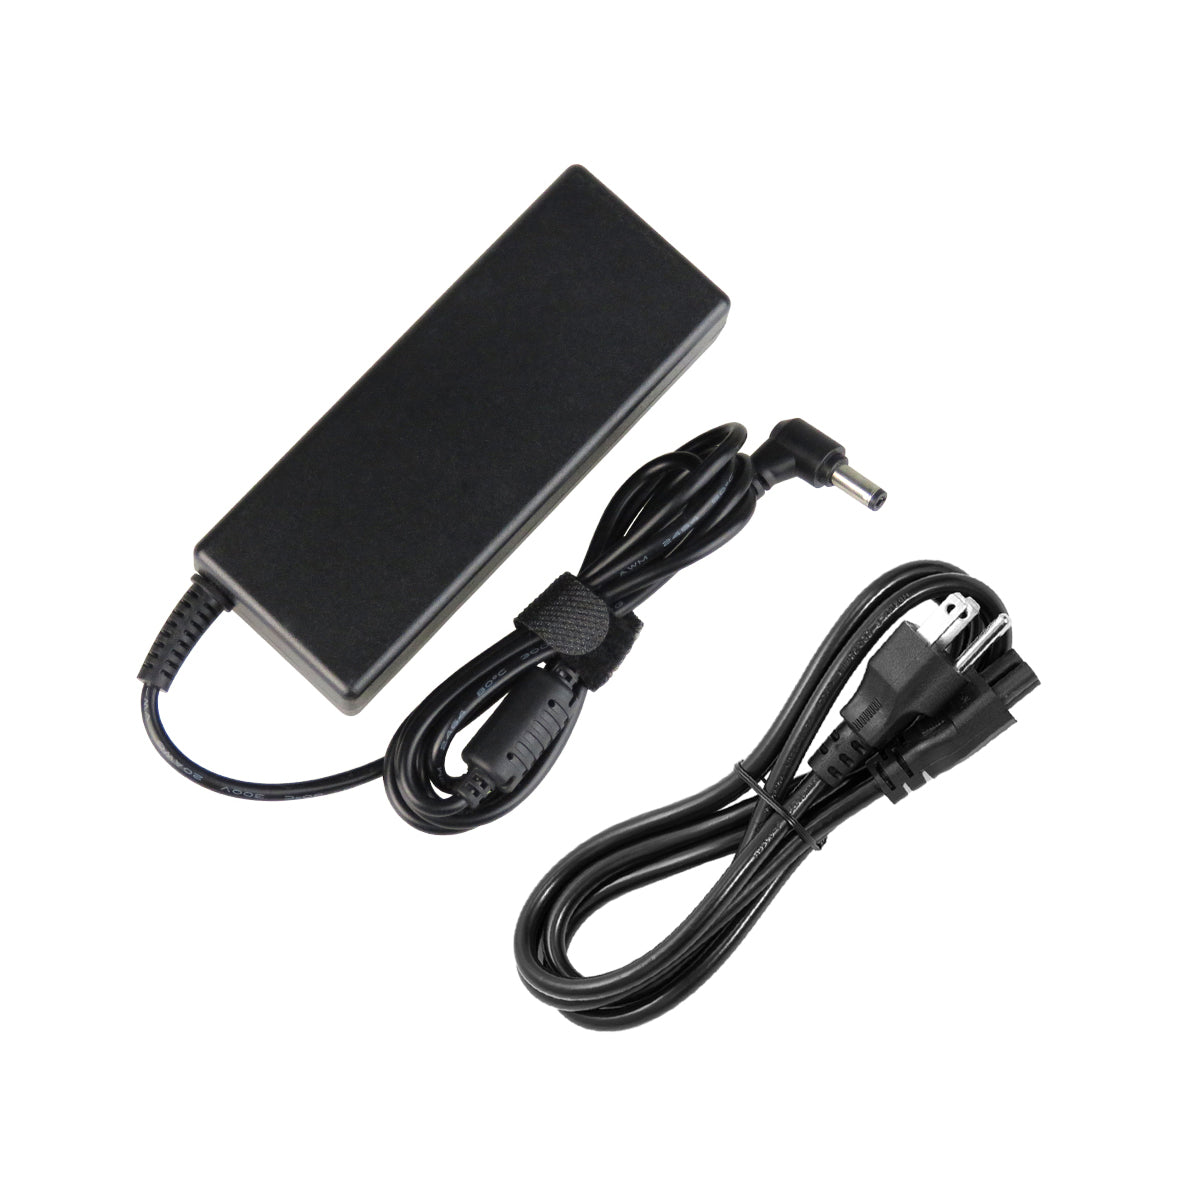 AC Adapter Charger for ASUS Z54c Notebook.